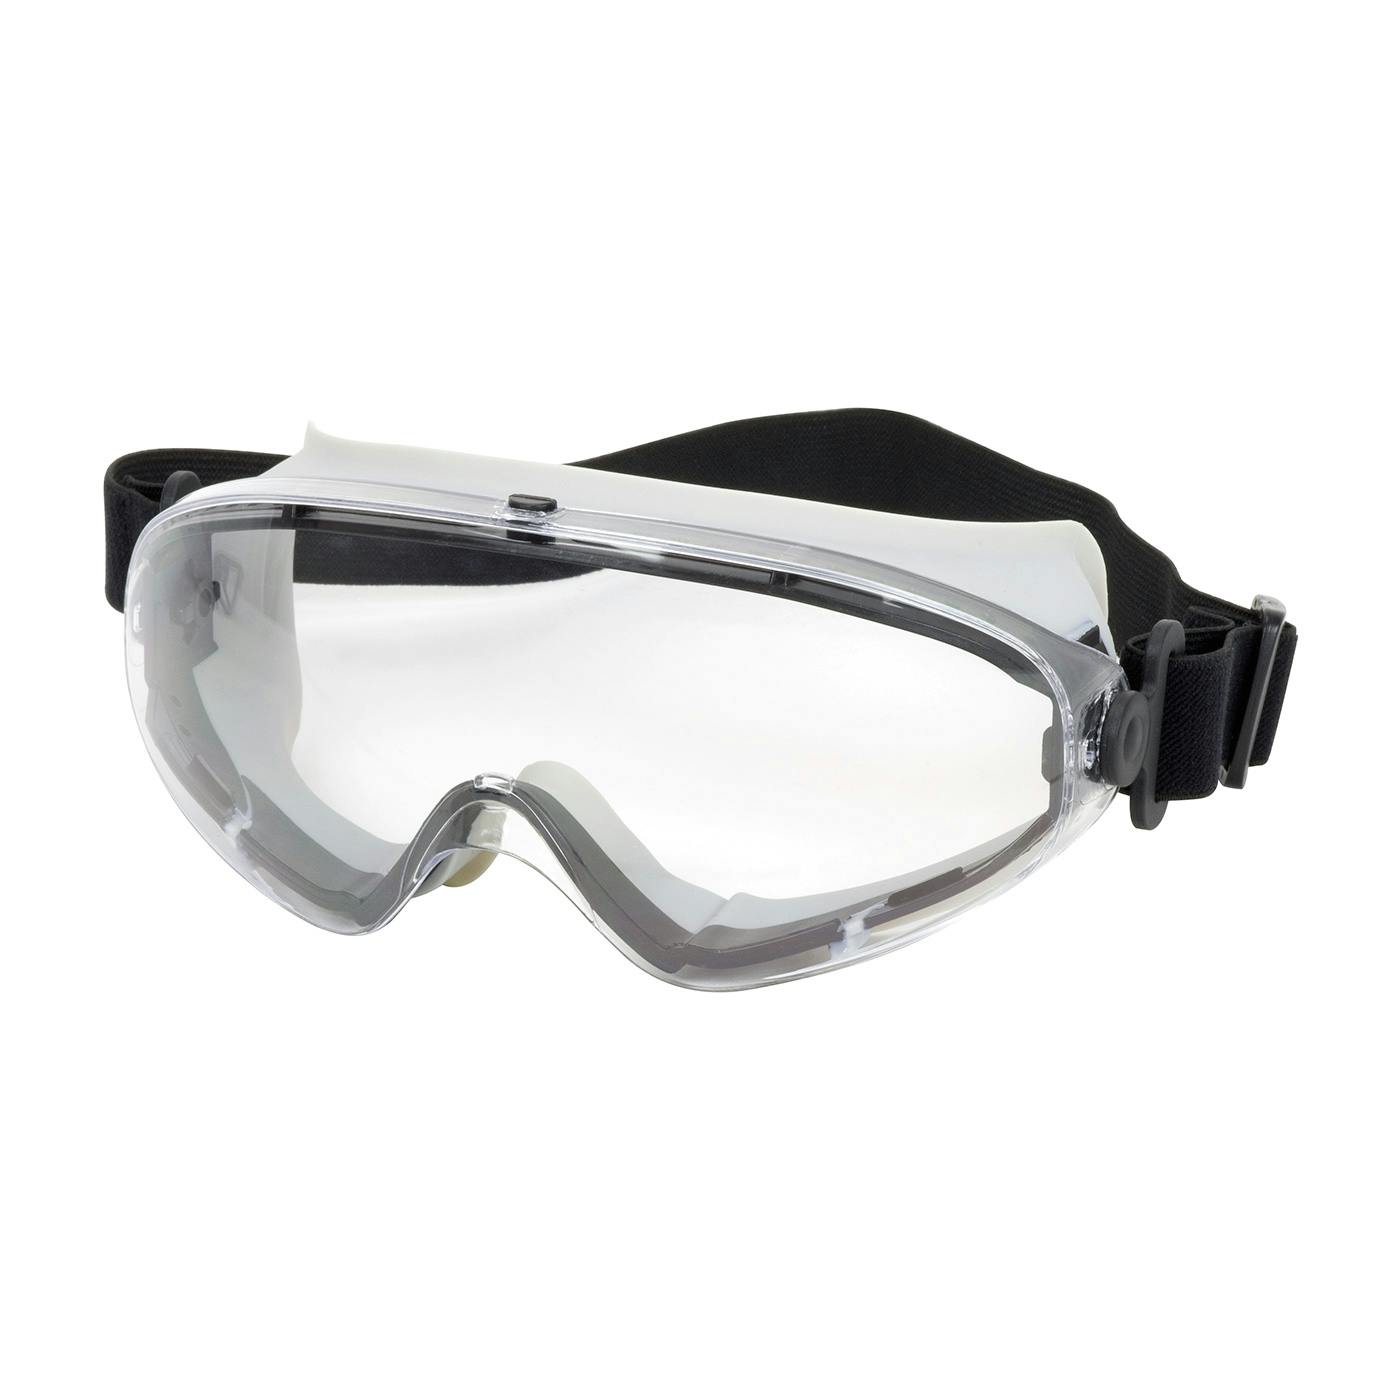 Indirect Vent Goggle with Light Gray Body, Clear Lens and Anti-Scratch / Anti-Fog Coating - Non-Latex Strap, Gray (251-80-0020) - OS_0